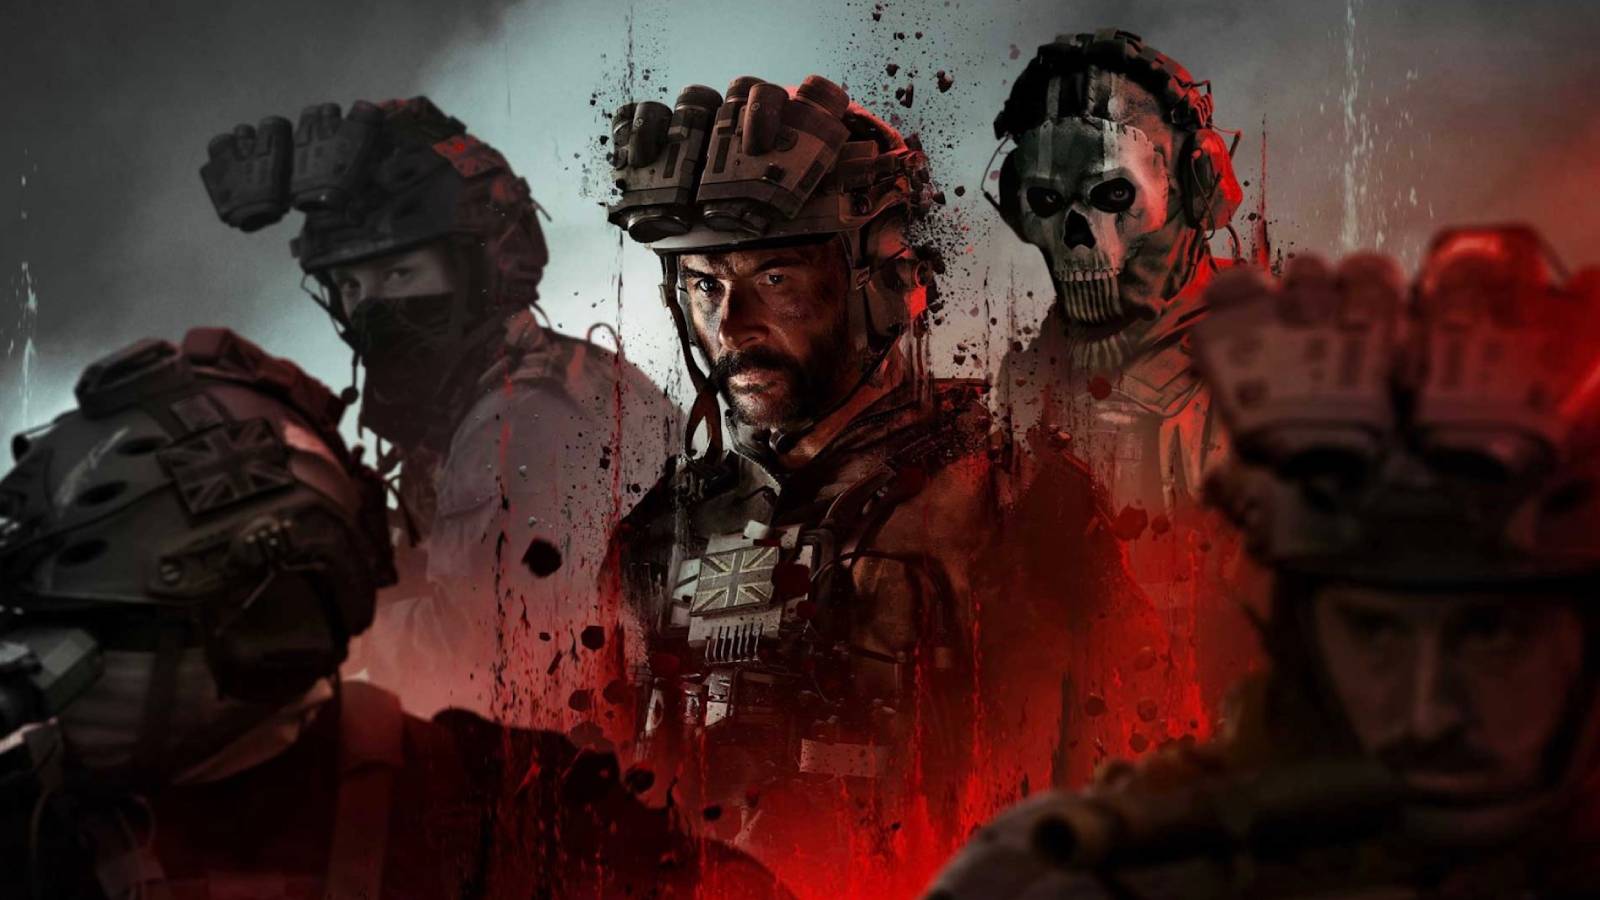 MW3 Captain Price, Ghost, and more look off camera